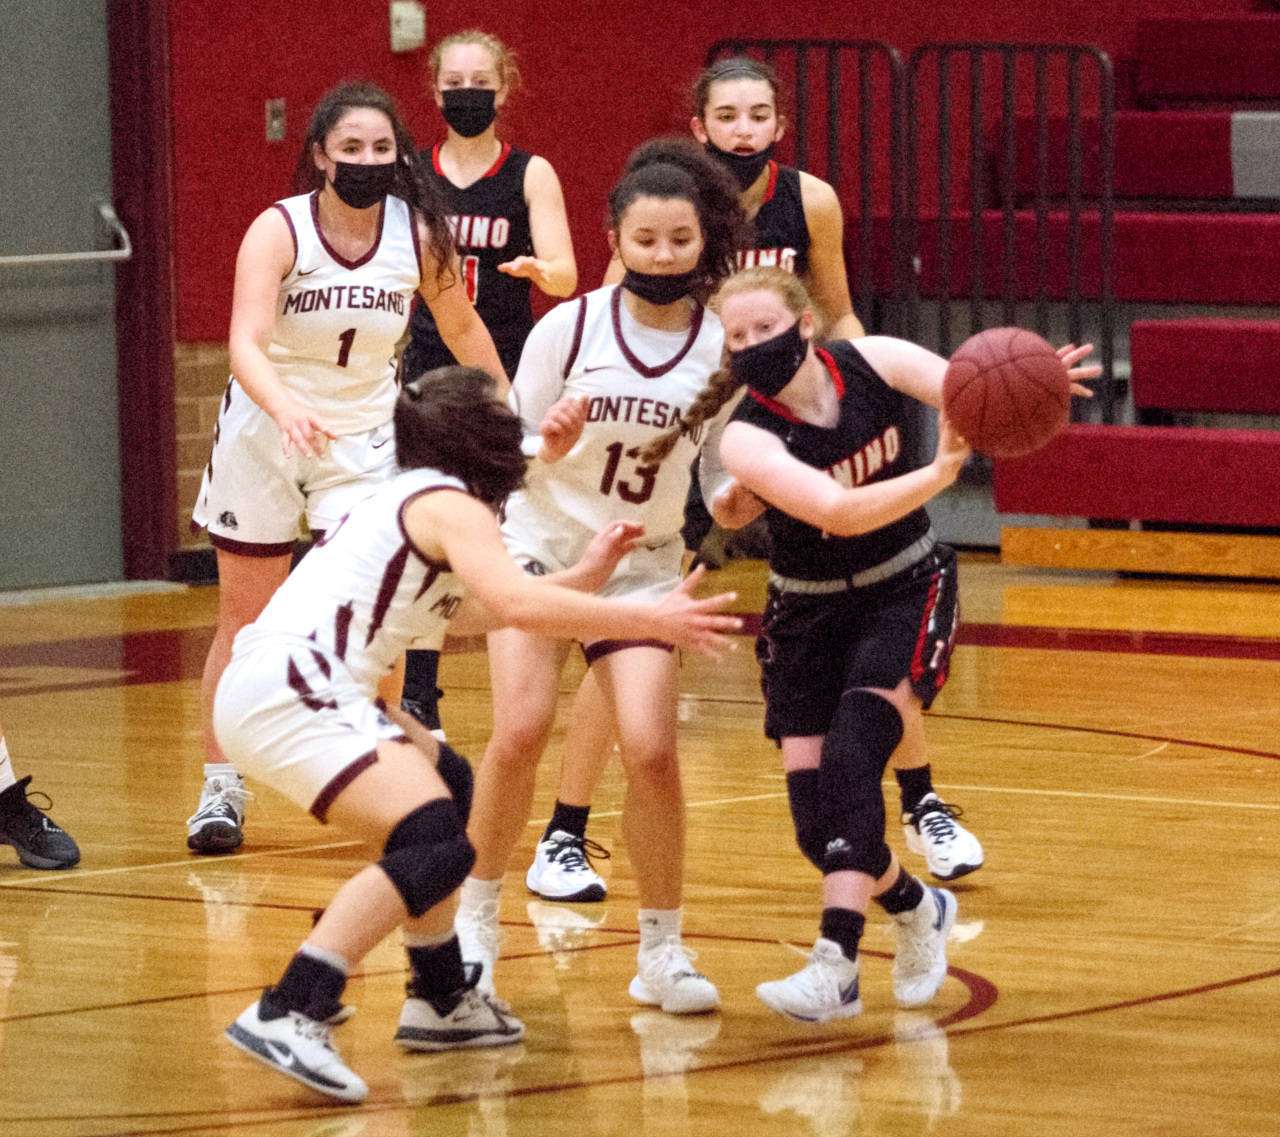 RYAN SPARKS | THE DAILY WORLD 
Montesano defenders Maia Young (13) and Jaiden King hound Tenino guard Abby Severse during Tuesday’s game in Montesano. The Bulldogs outscored Tenino 32-16 in the second half to run away with a 57-43 victory.